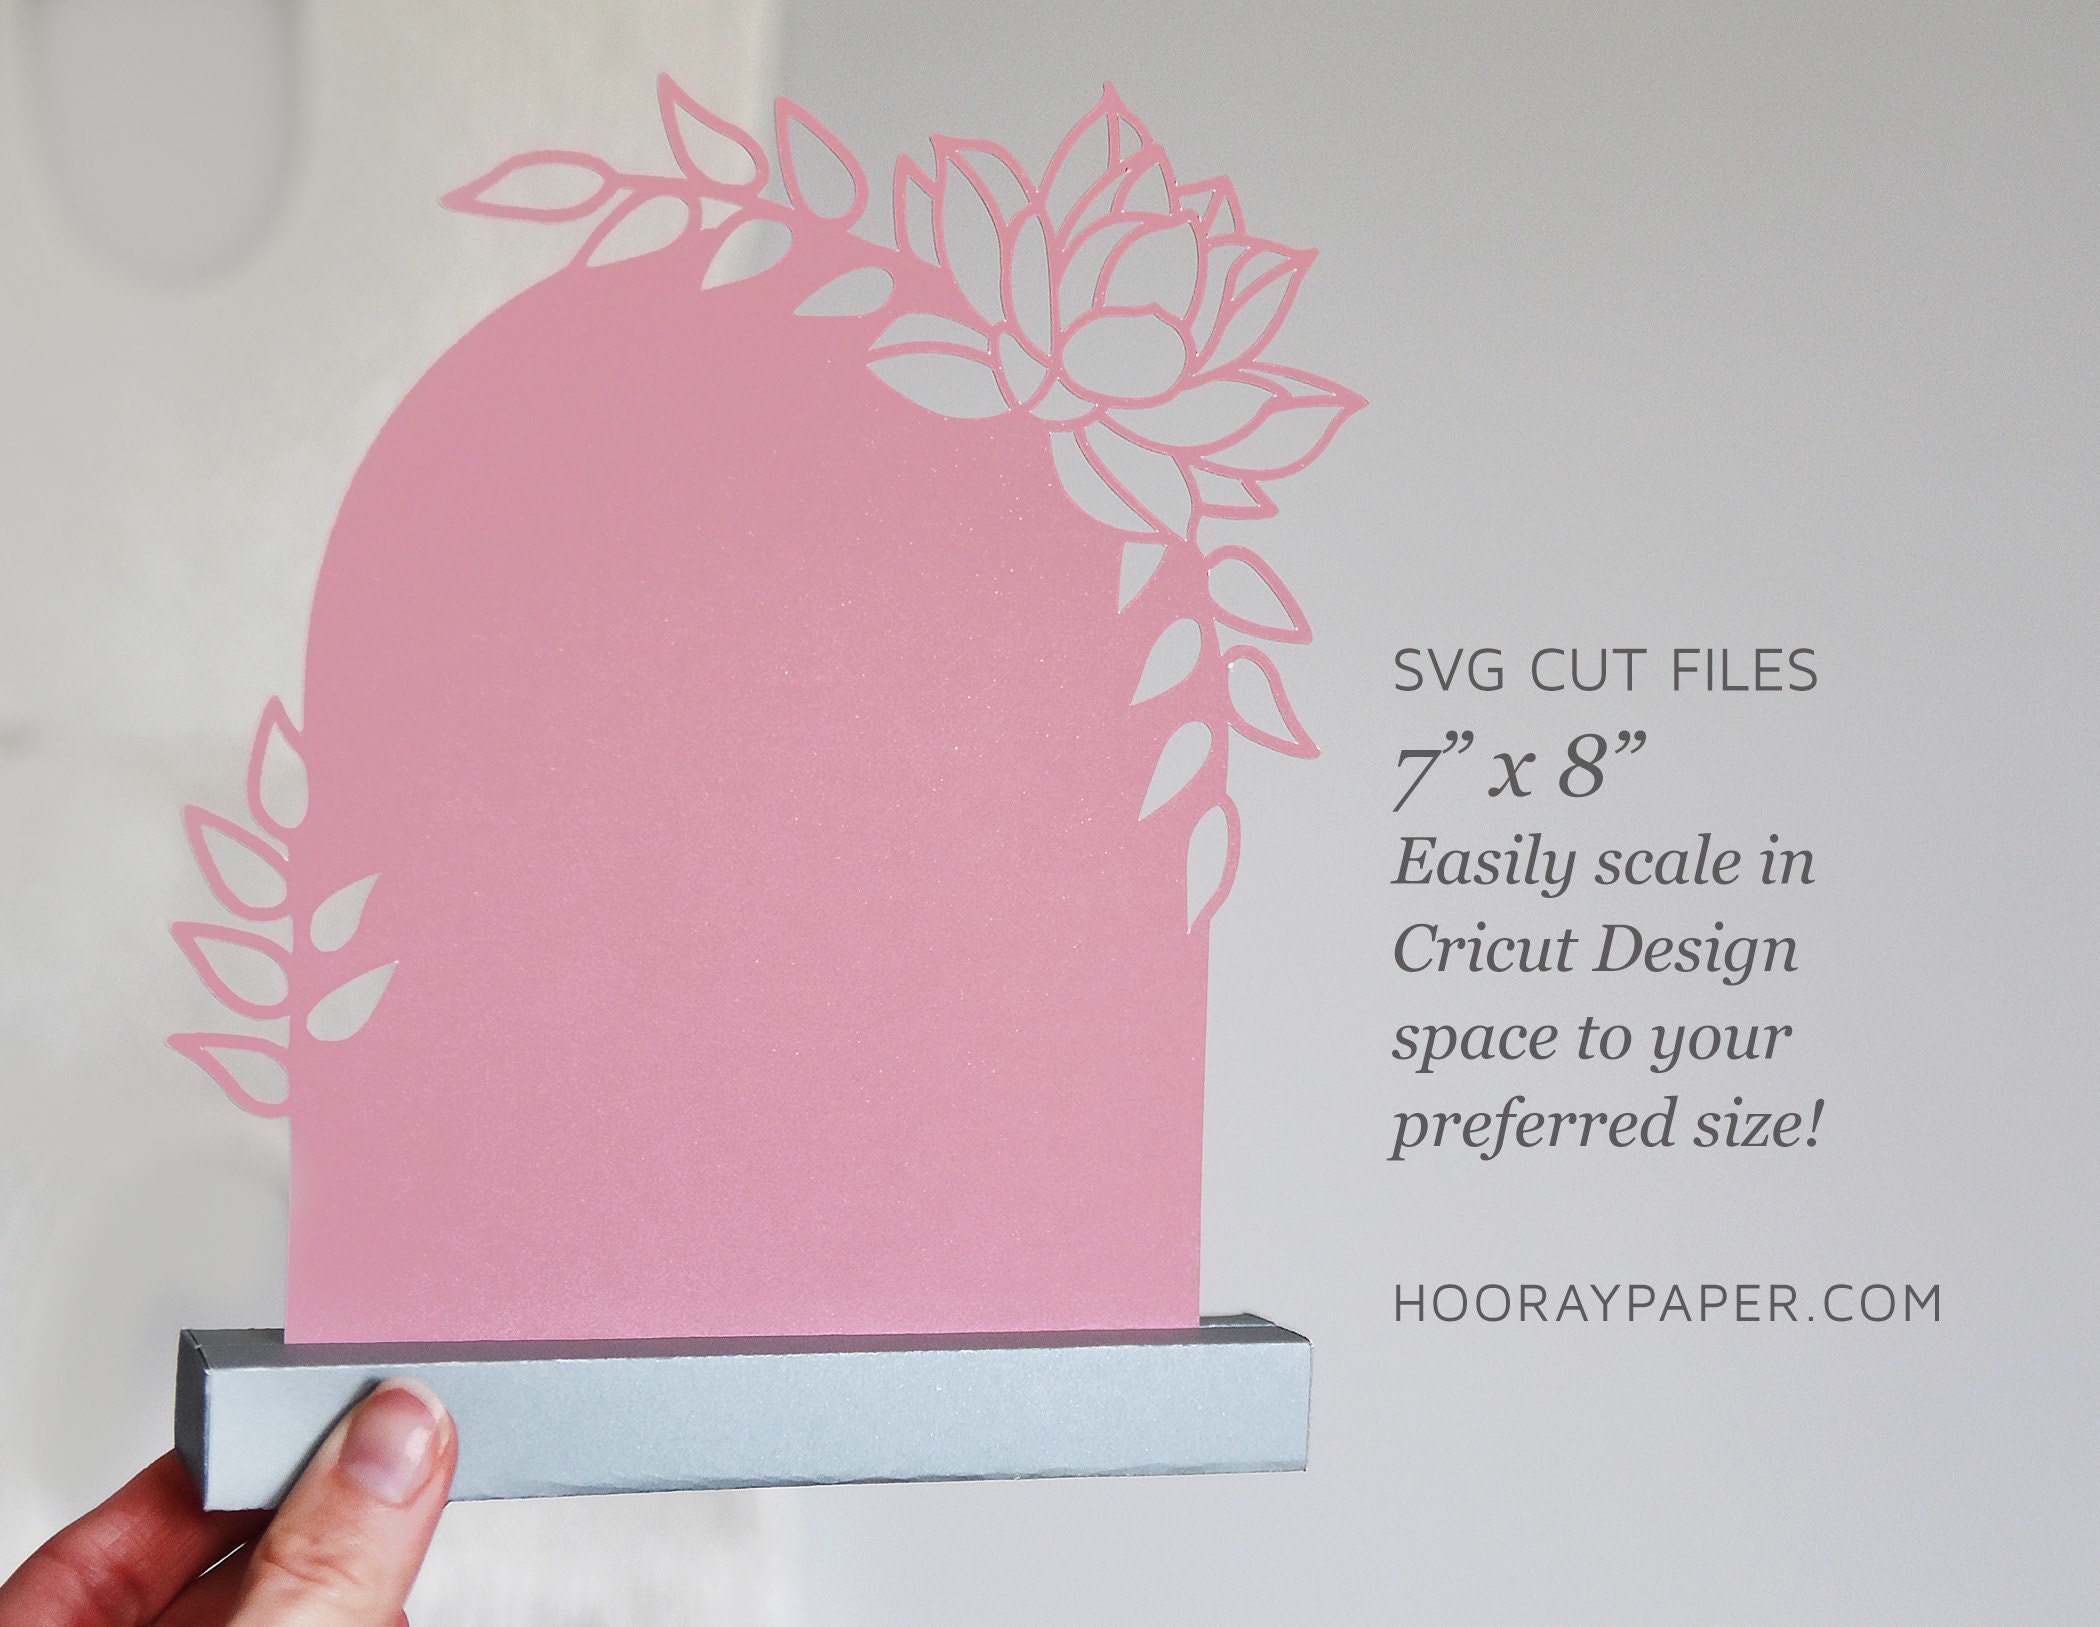 Boho Floral Die Cut Printables and Cricut Cut Files - Happily Ever After,  Etc.